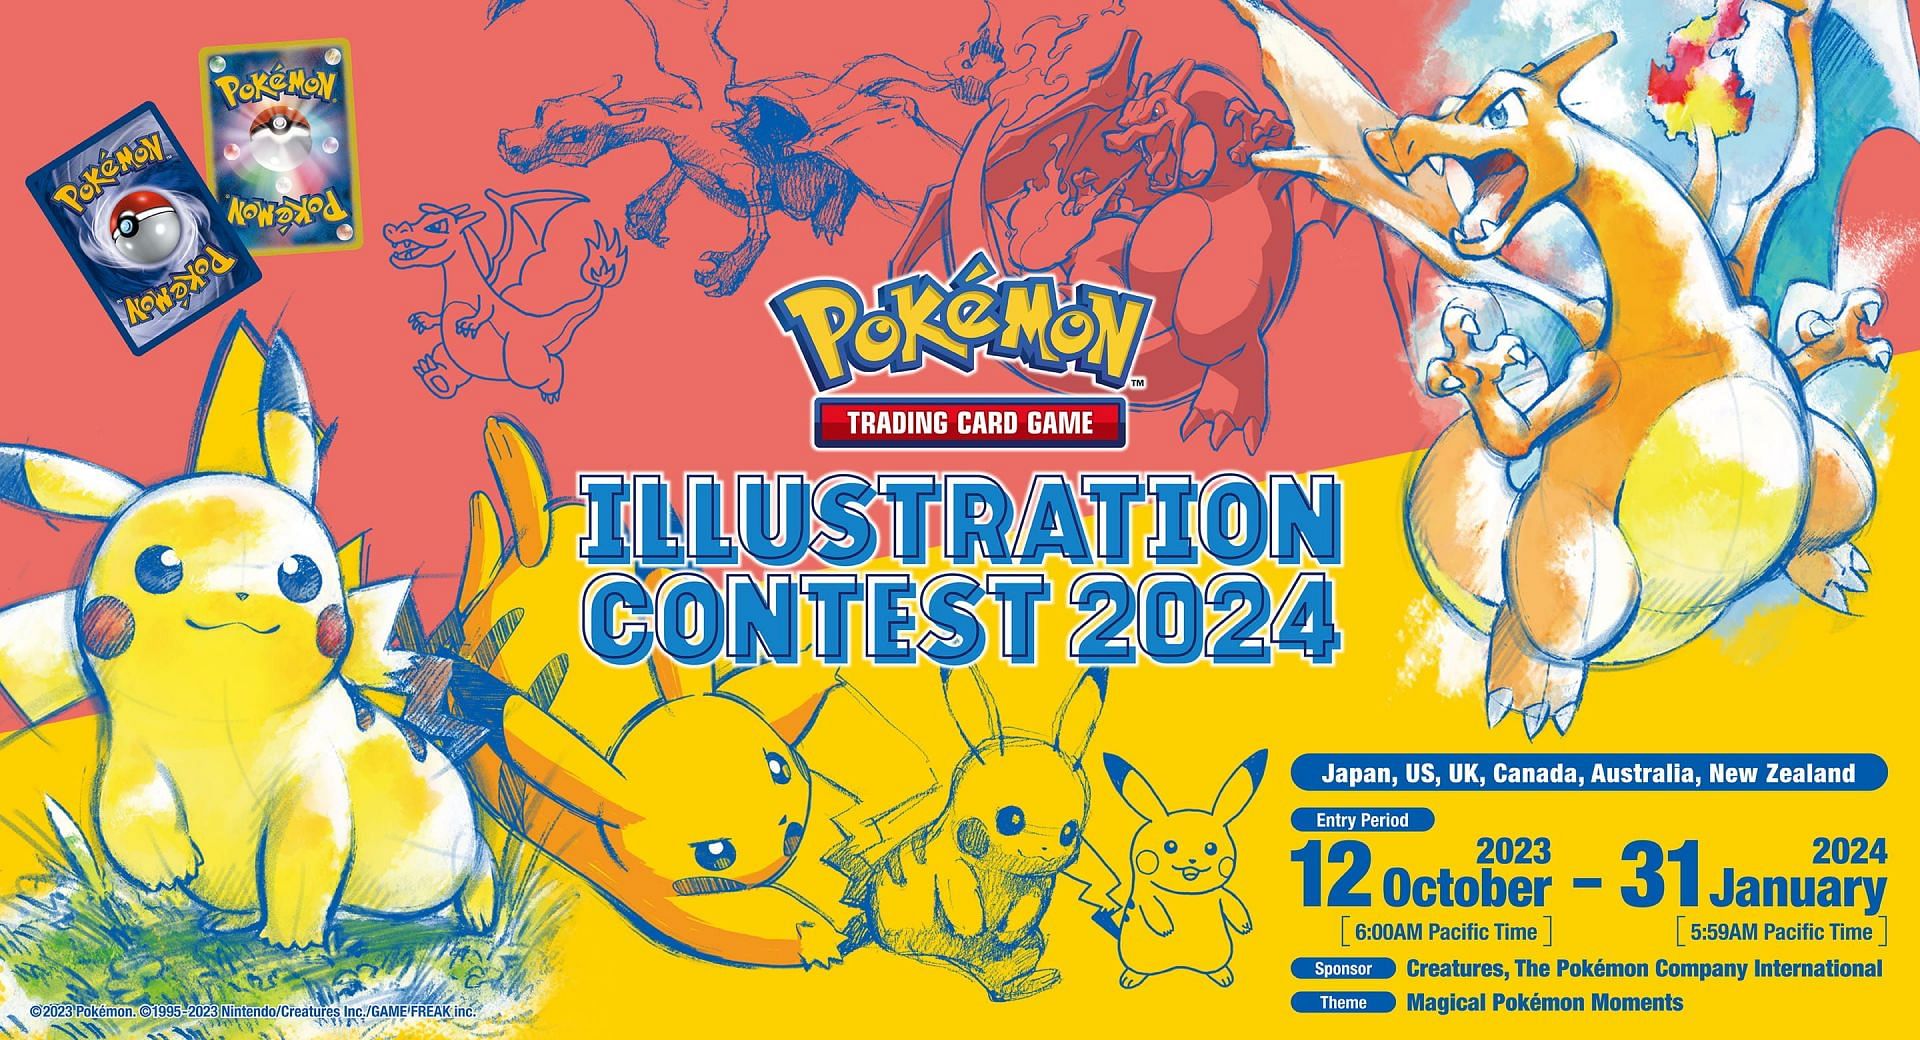 Pokemon TCG bans entries from top 300 spots of Illustration Contest 2024.